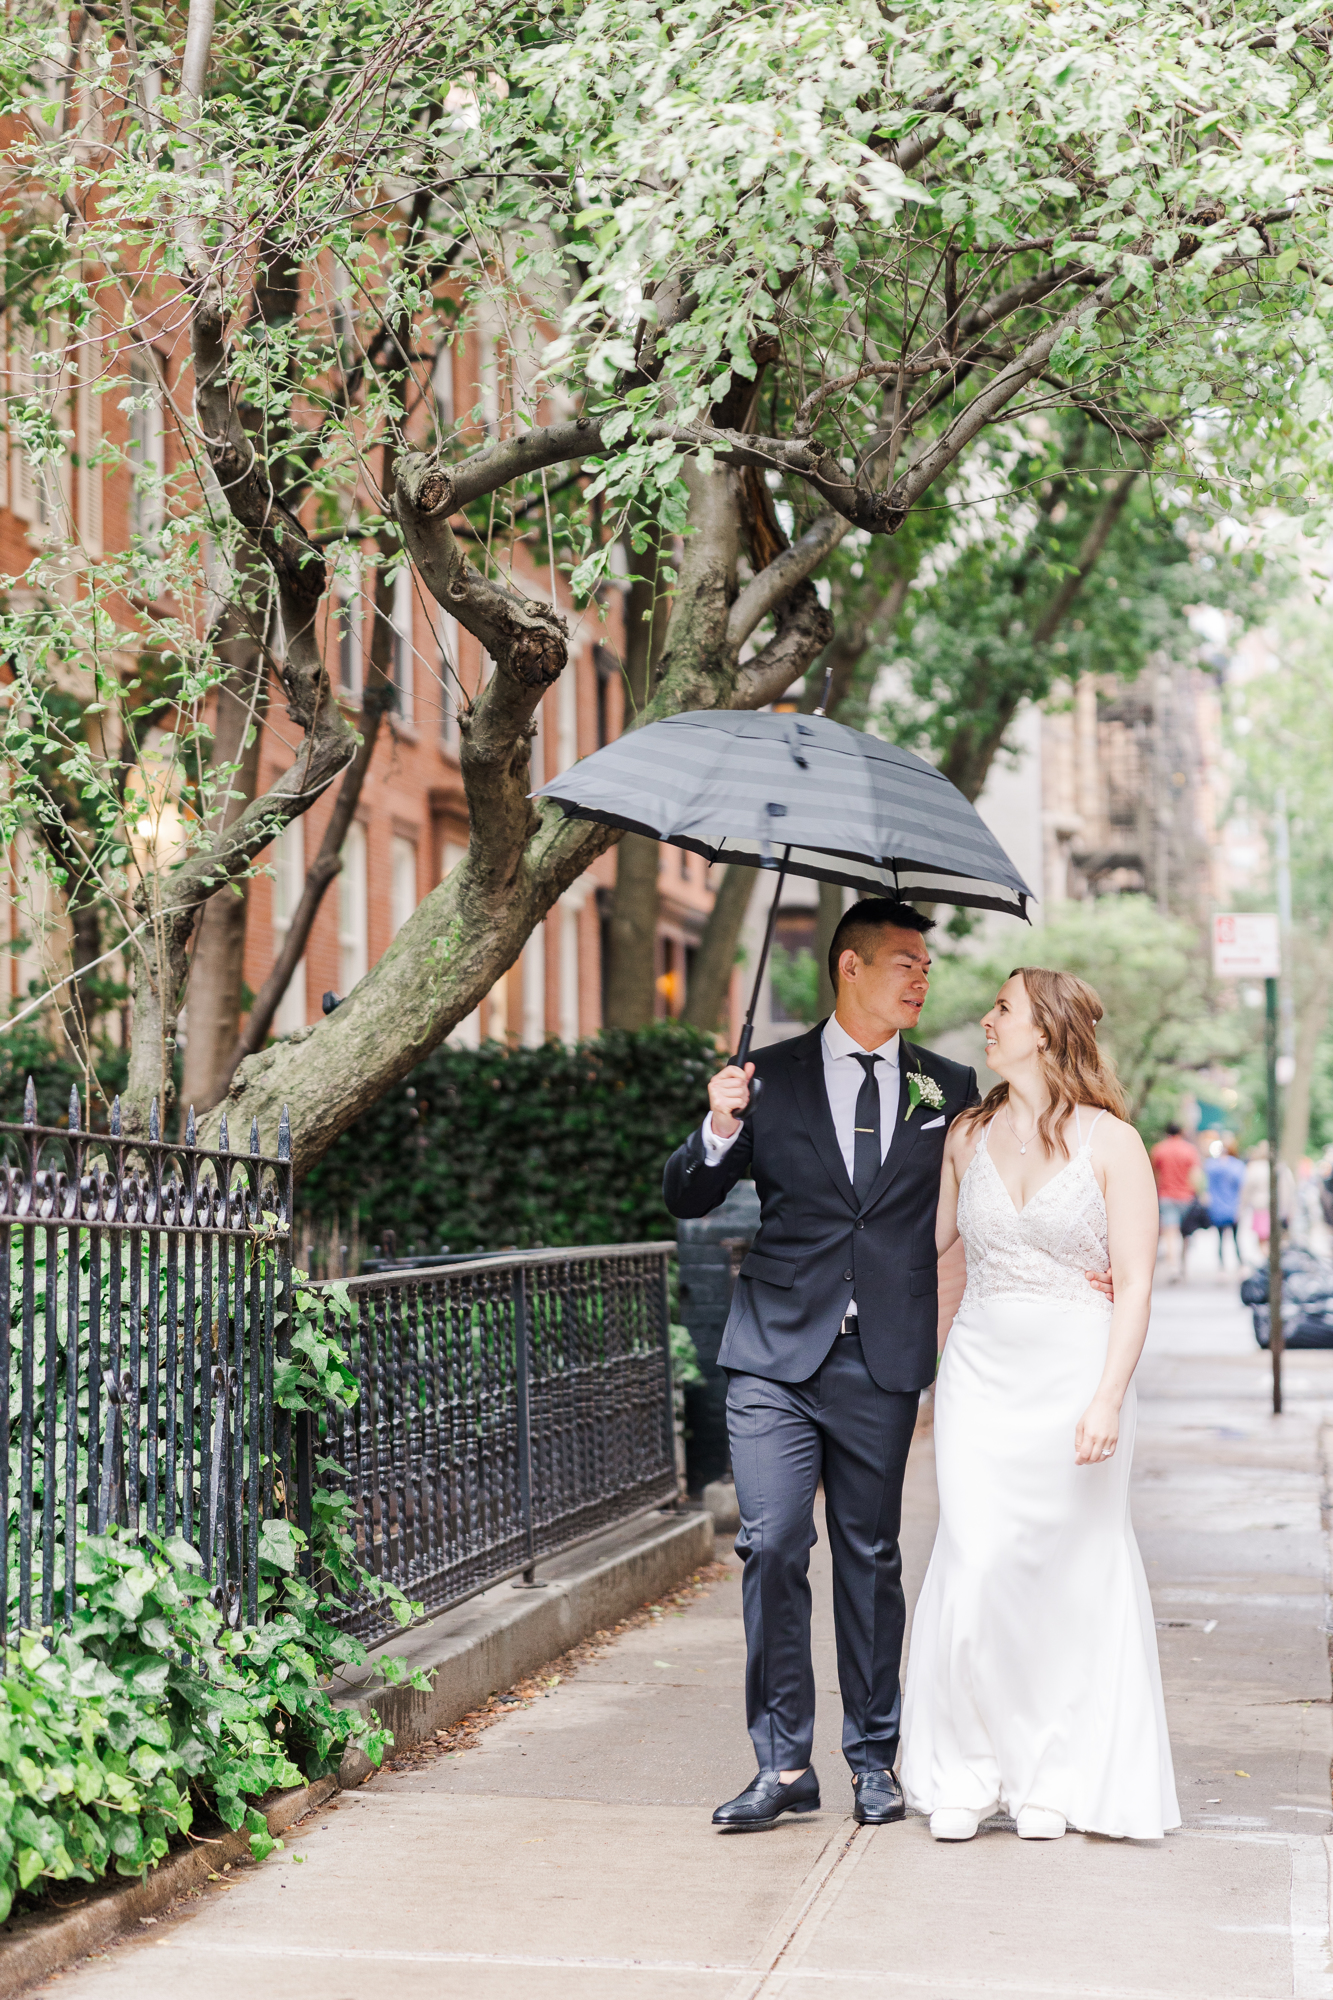 How to book a New York Wedding Photographer